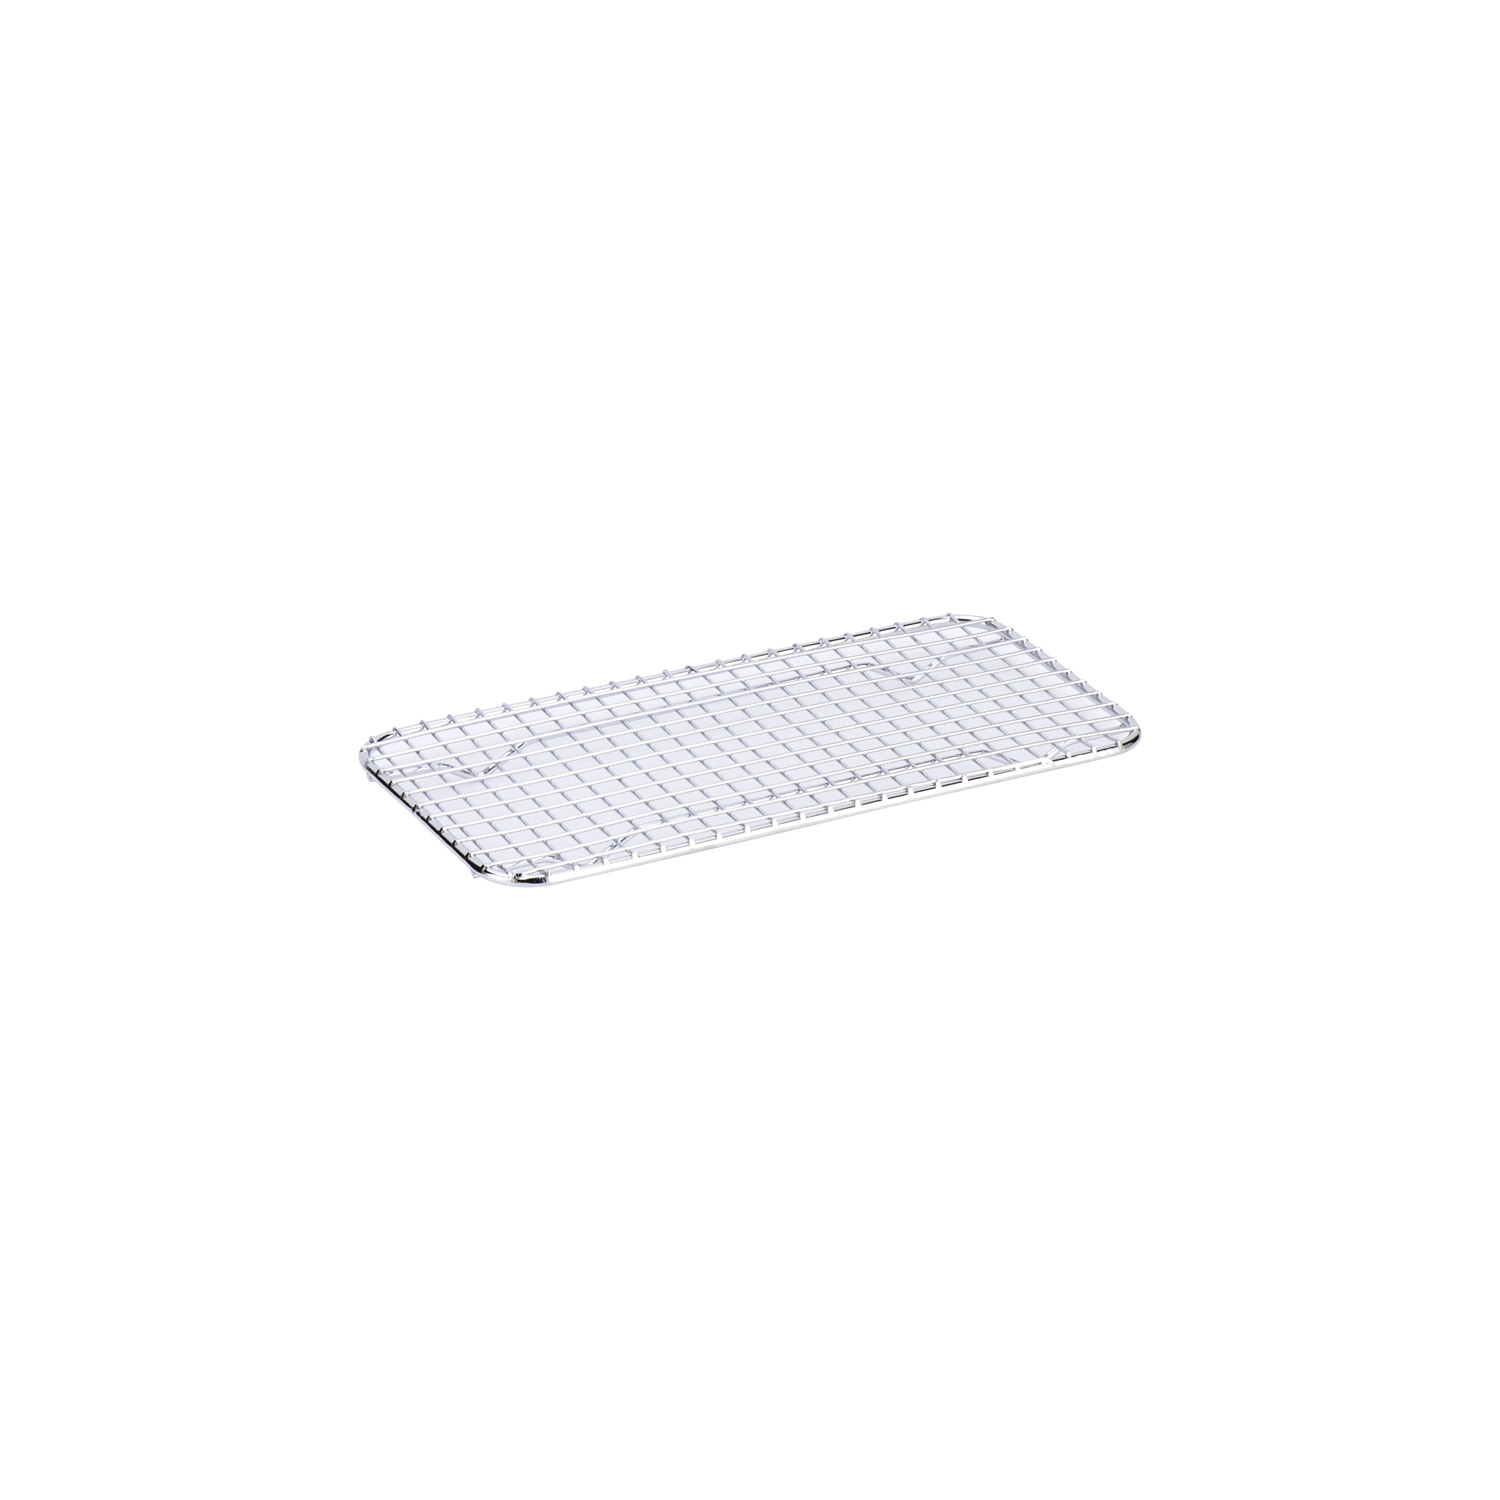 CAC China PGTP-1005 Third Size  Sheet Pan with Footed Grate 10" x 5"